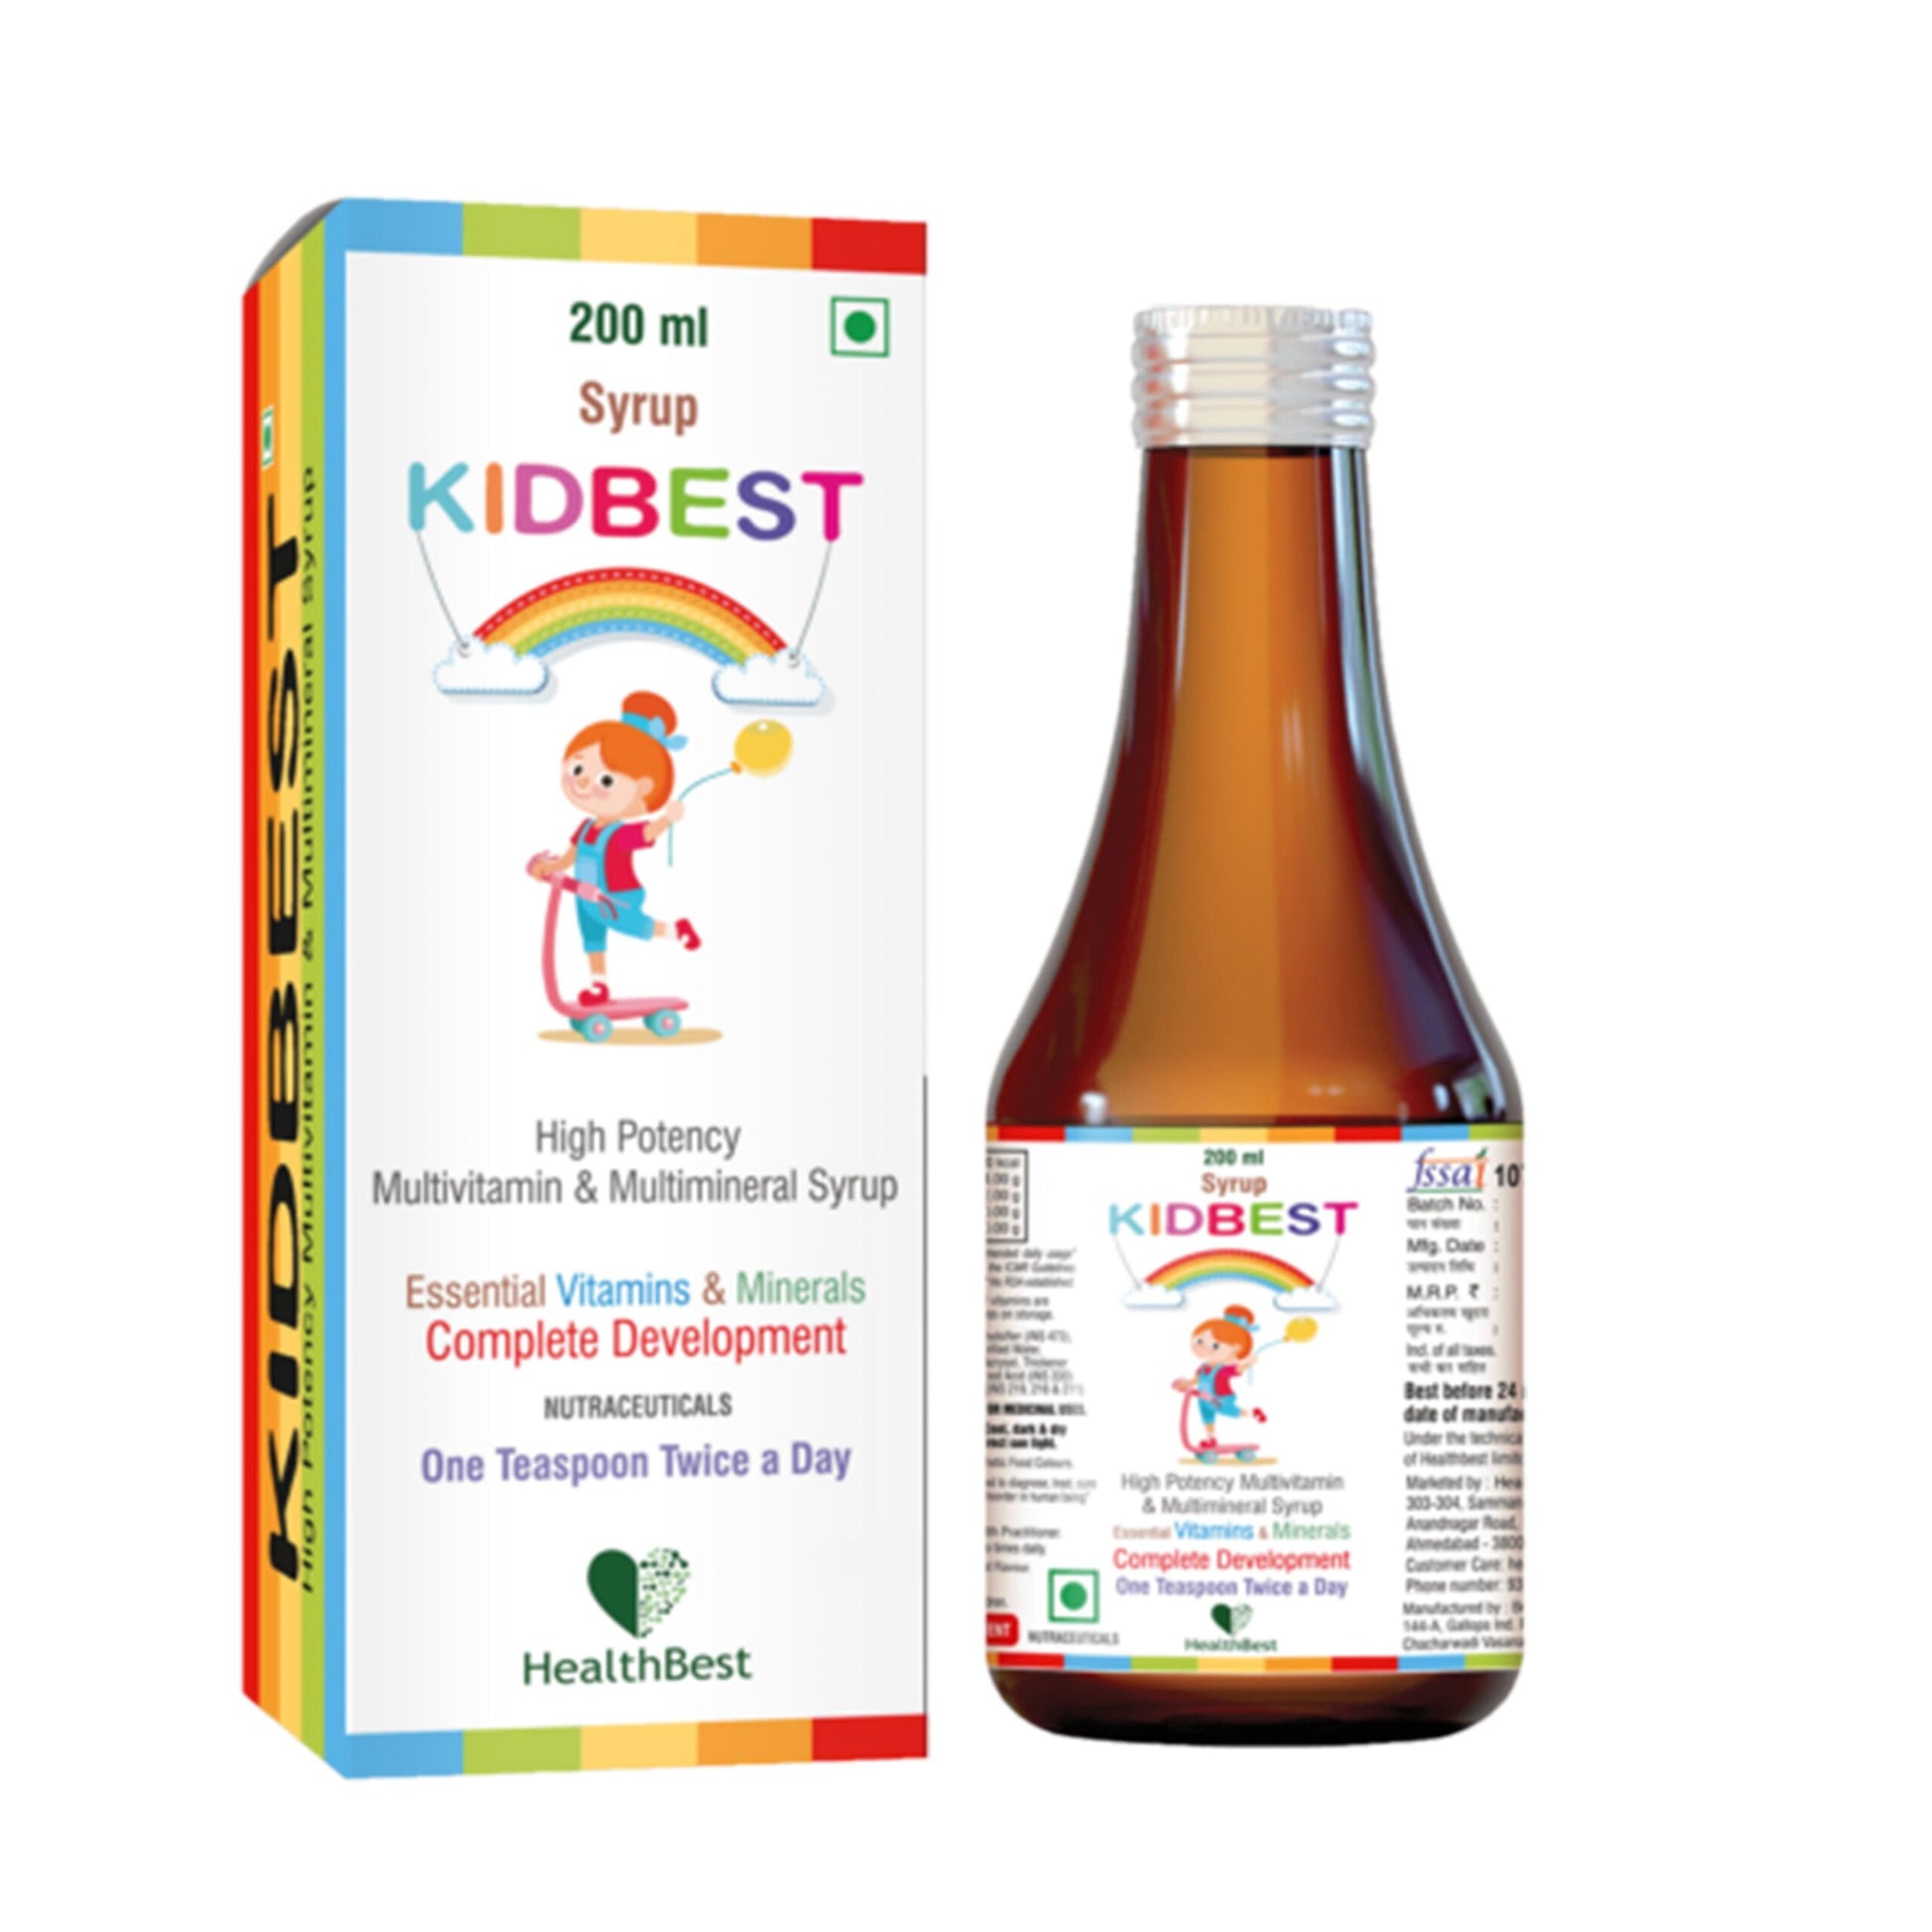 Kidbest Syrup for Kids